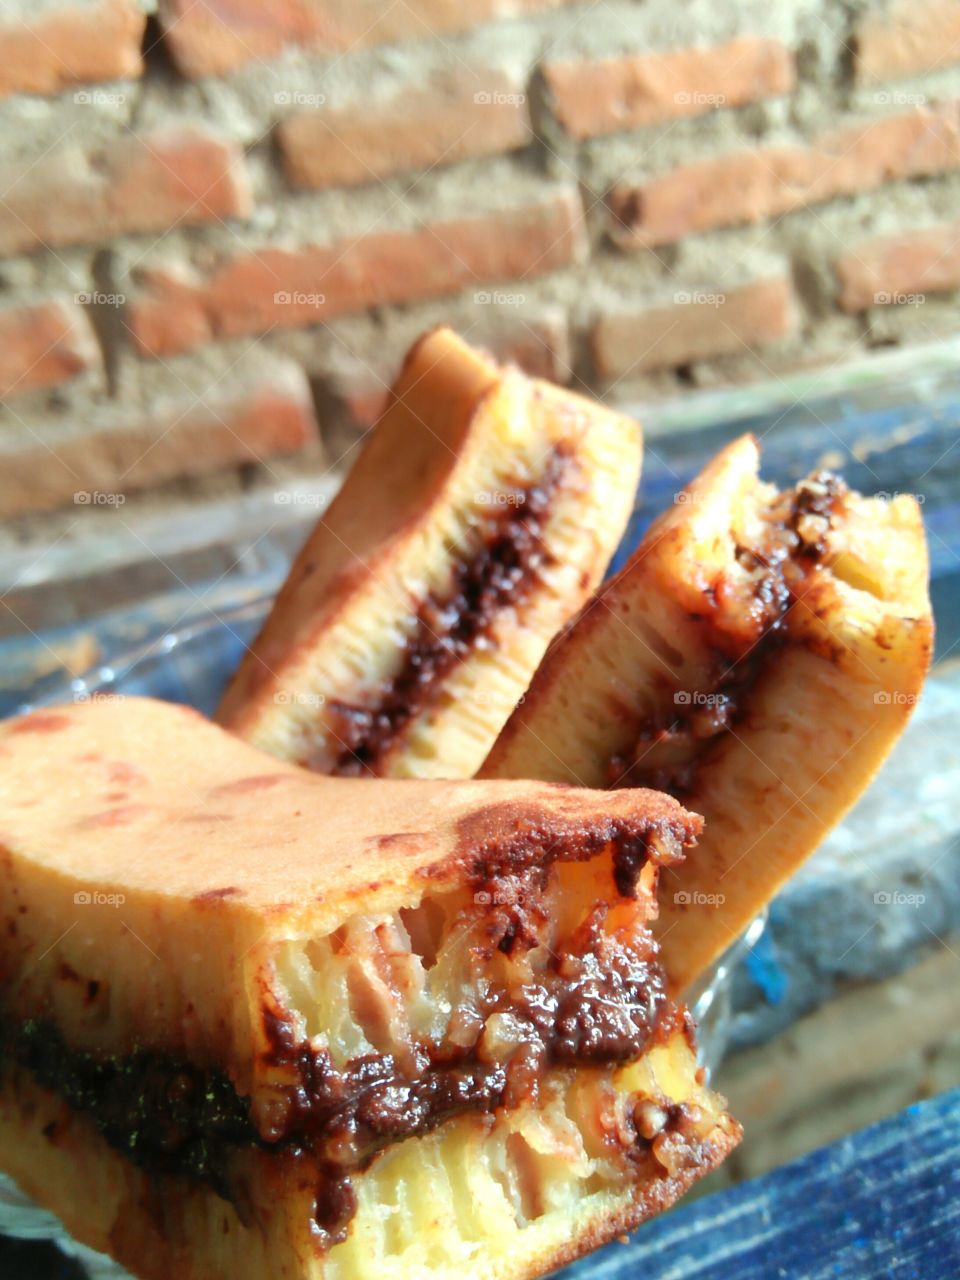 This is Martabak Manis, one of popular snack in Indonesia. It's contain the combination of flour, eggs, and filled by chocolate, roasted peanuts, and condensed milk! You can improve the filler by cheese, jam or candy too!